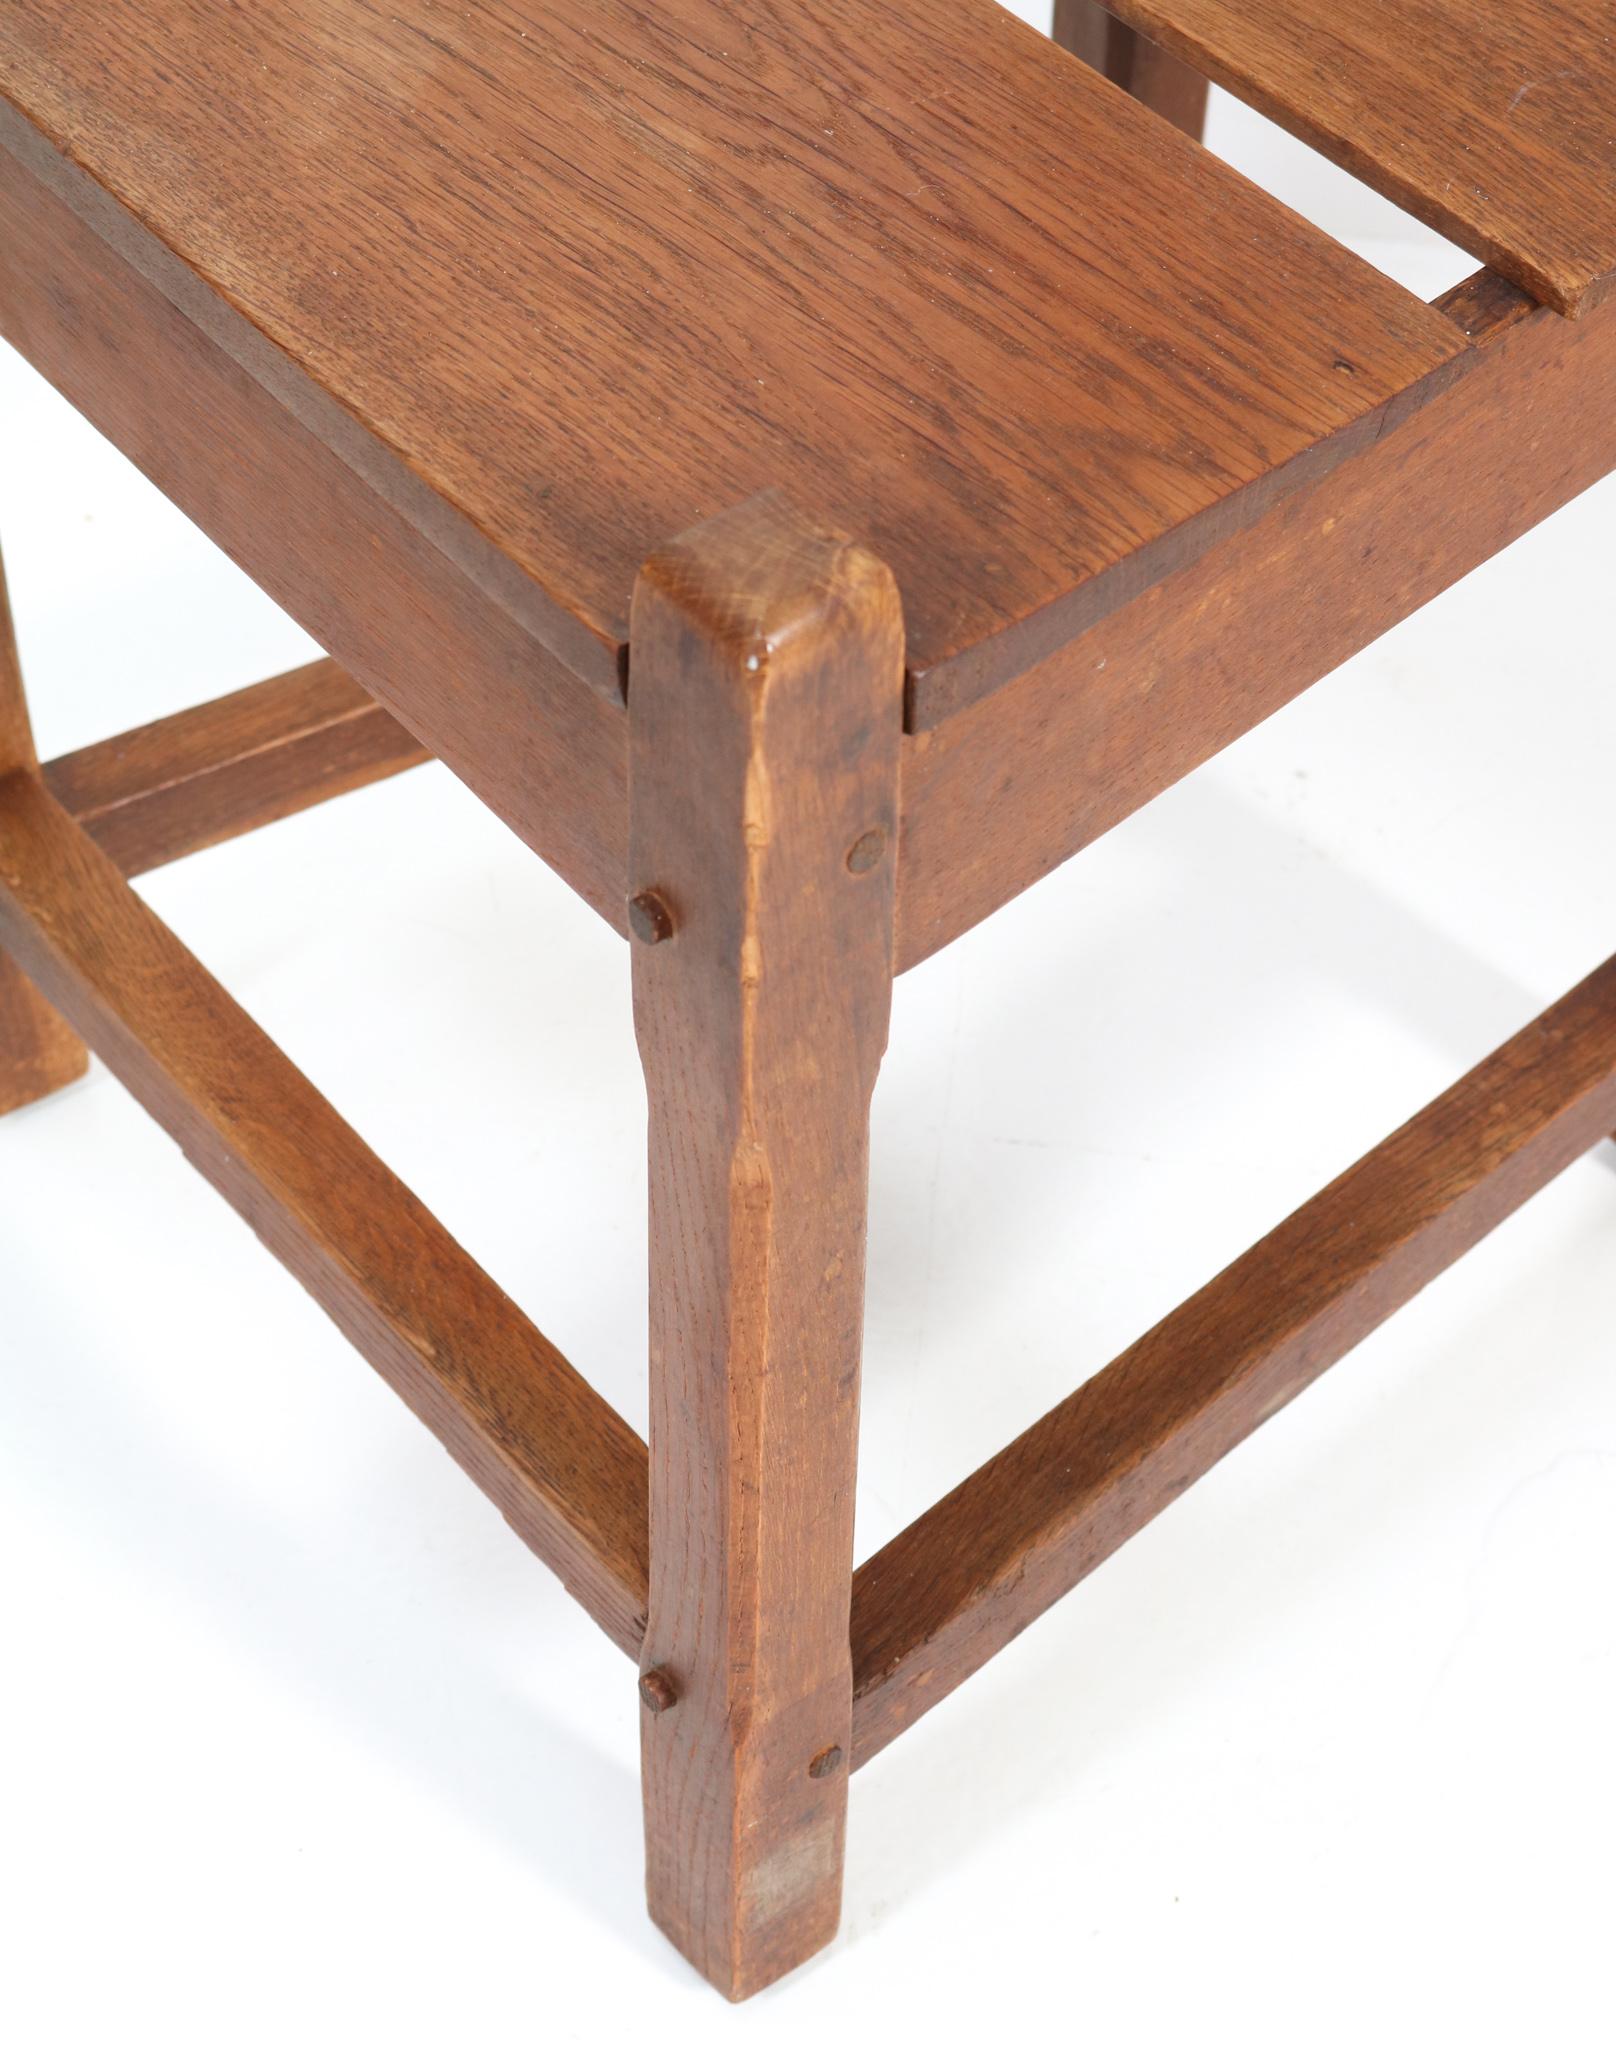 Four Oak Rustic Brutalist Chairs, 1940s For Sale 3